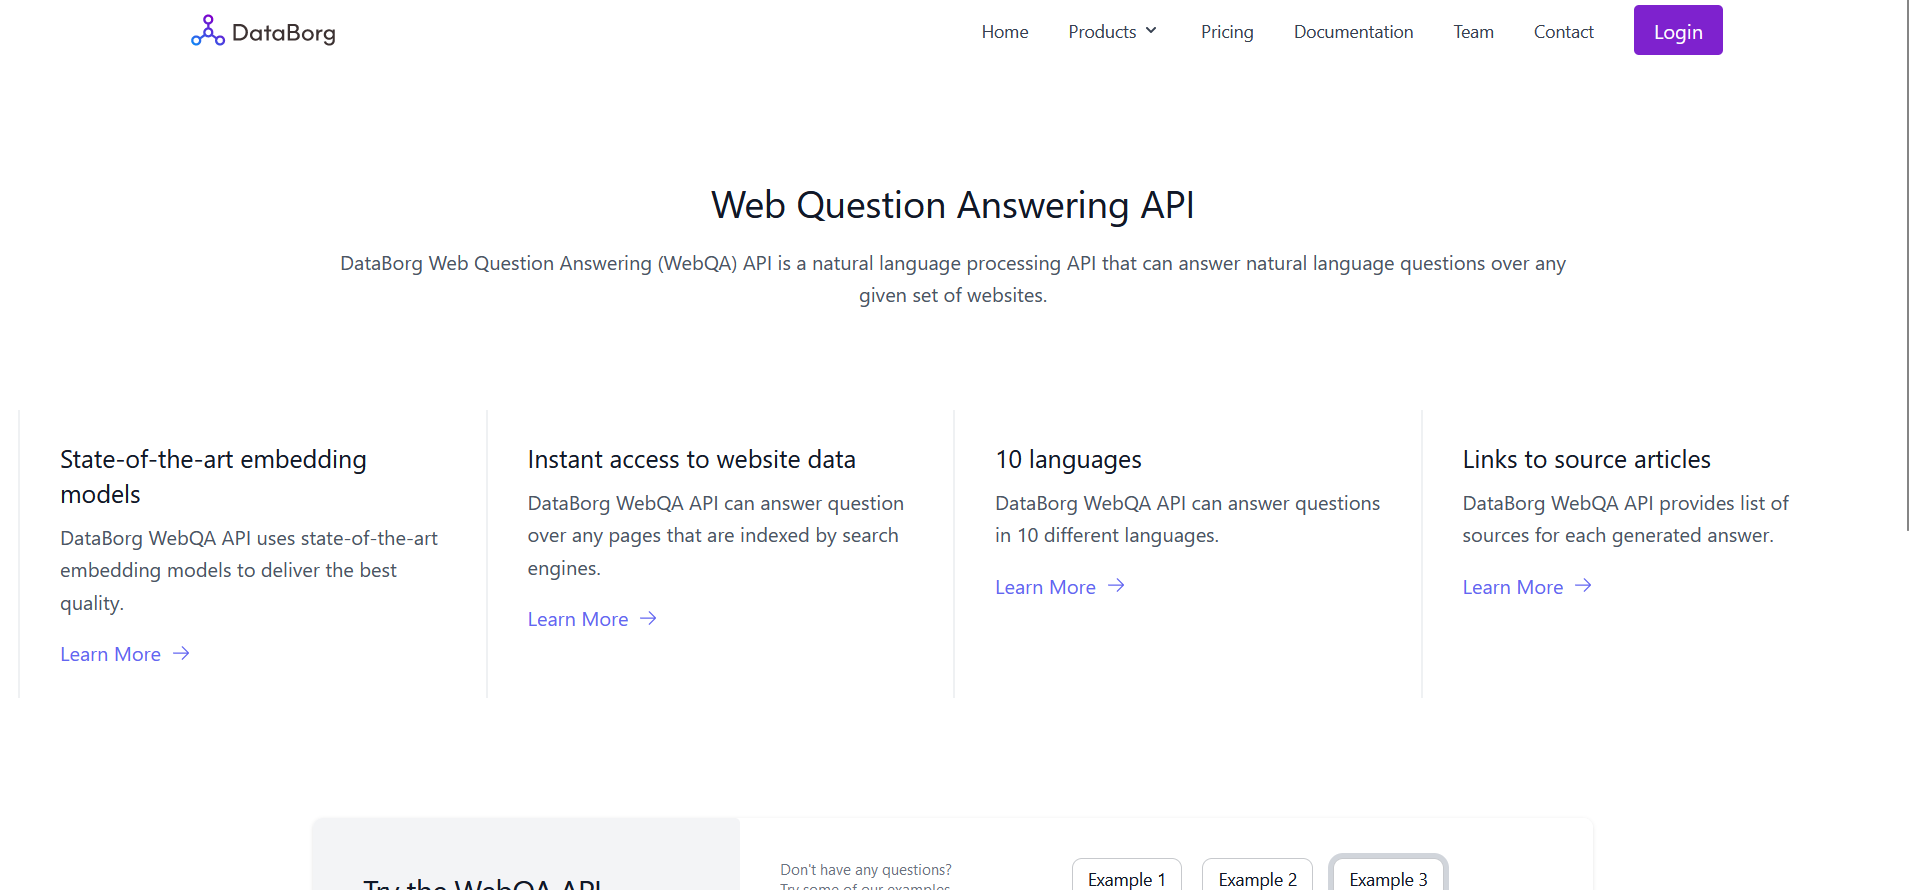  Run a custom Question Answering Bot on any